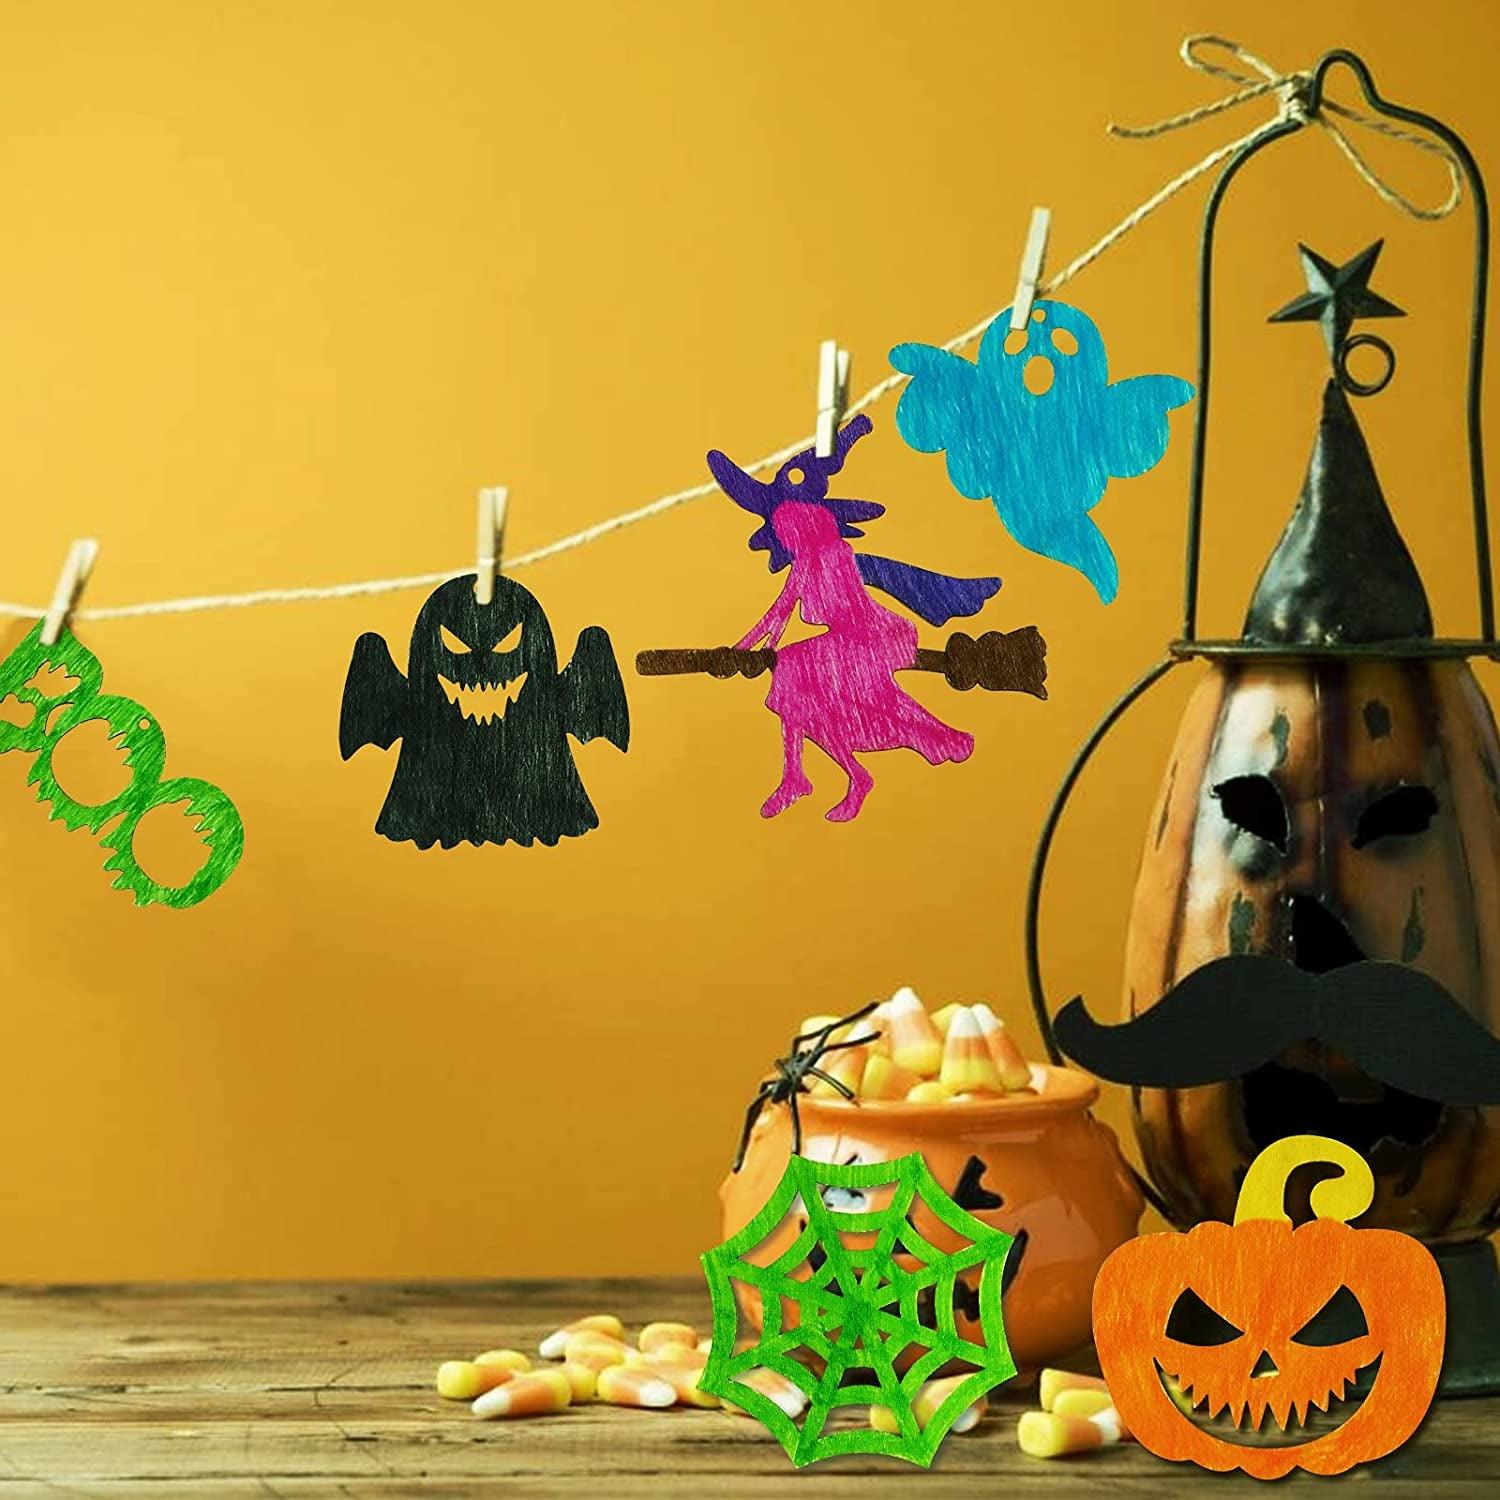 60PCS Halloween Wooden Slices Cutouts Ornaments DIY Crafts Unfinished Pre-Drilled Natural Wood for Kids Hanging Decorations Gifts - WoodArtSupply